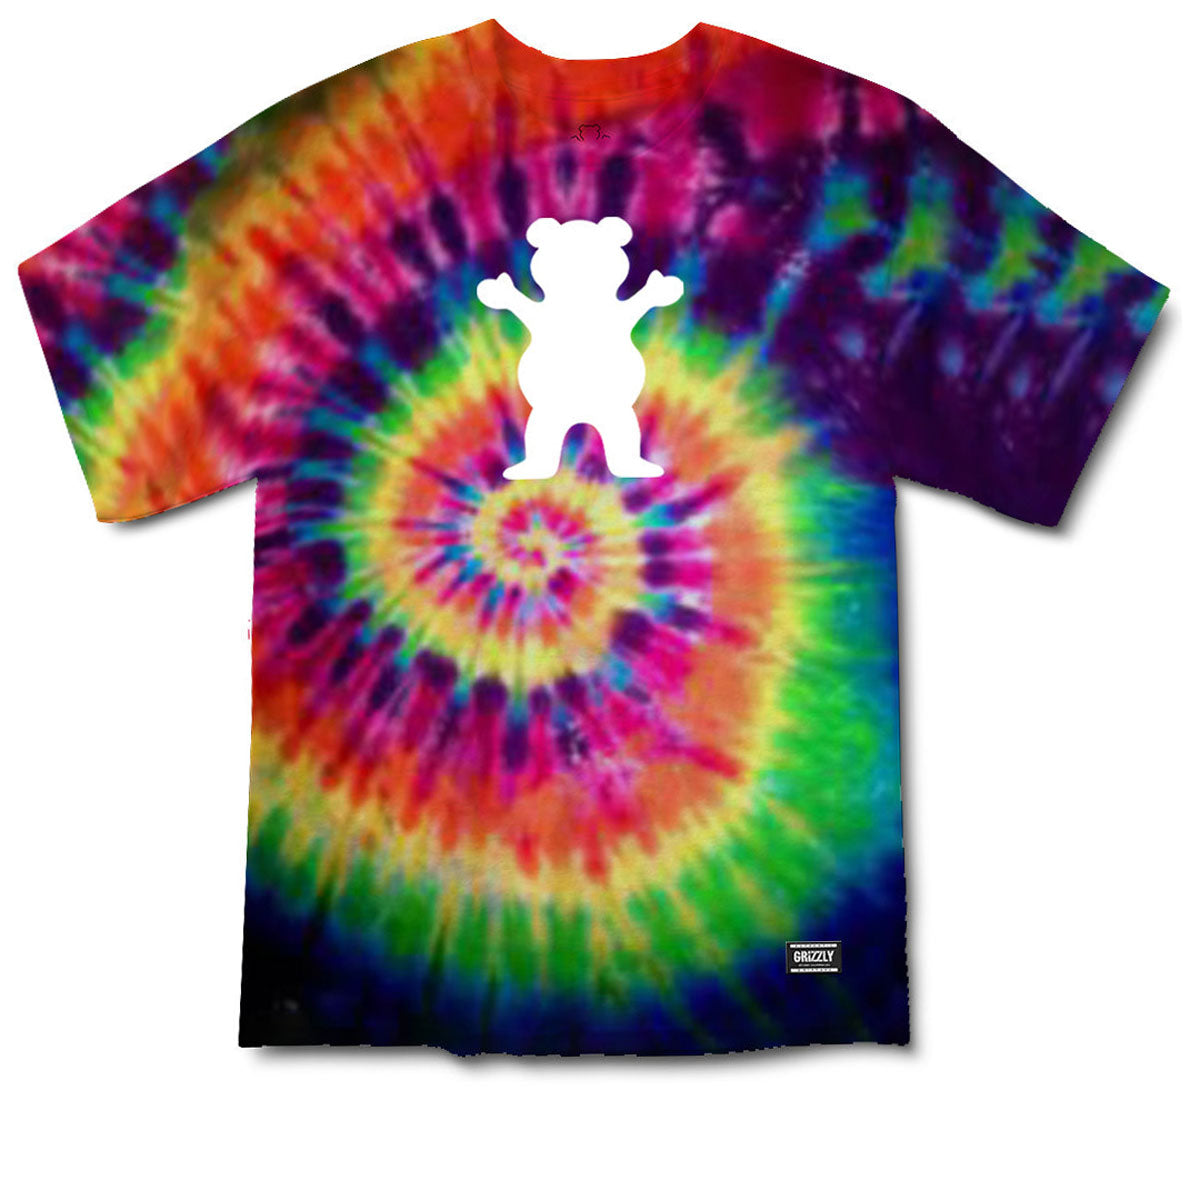 Grizzly OG Bear T-Shirt - Tie Dye/White image 1